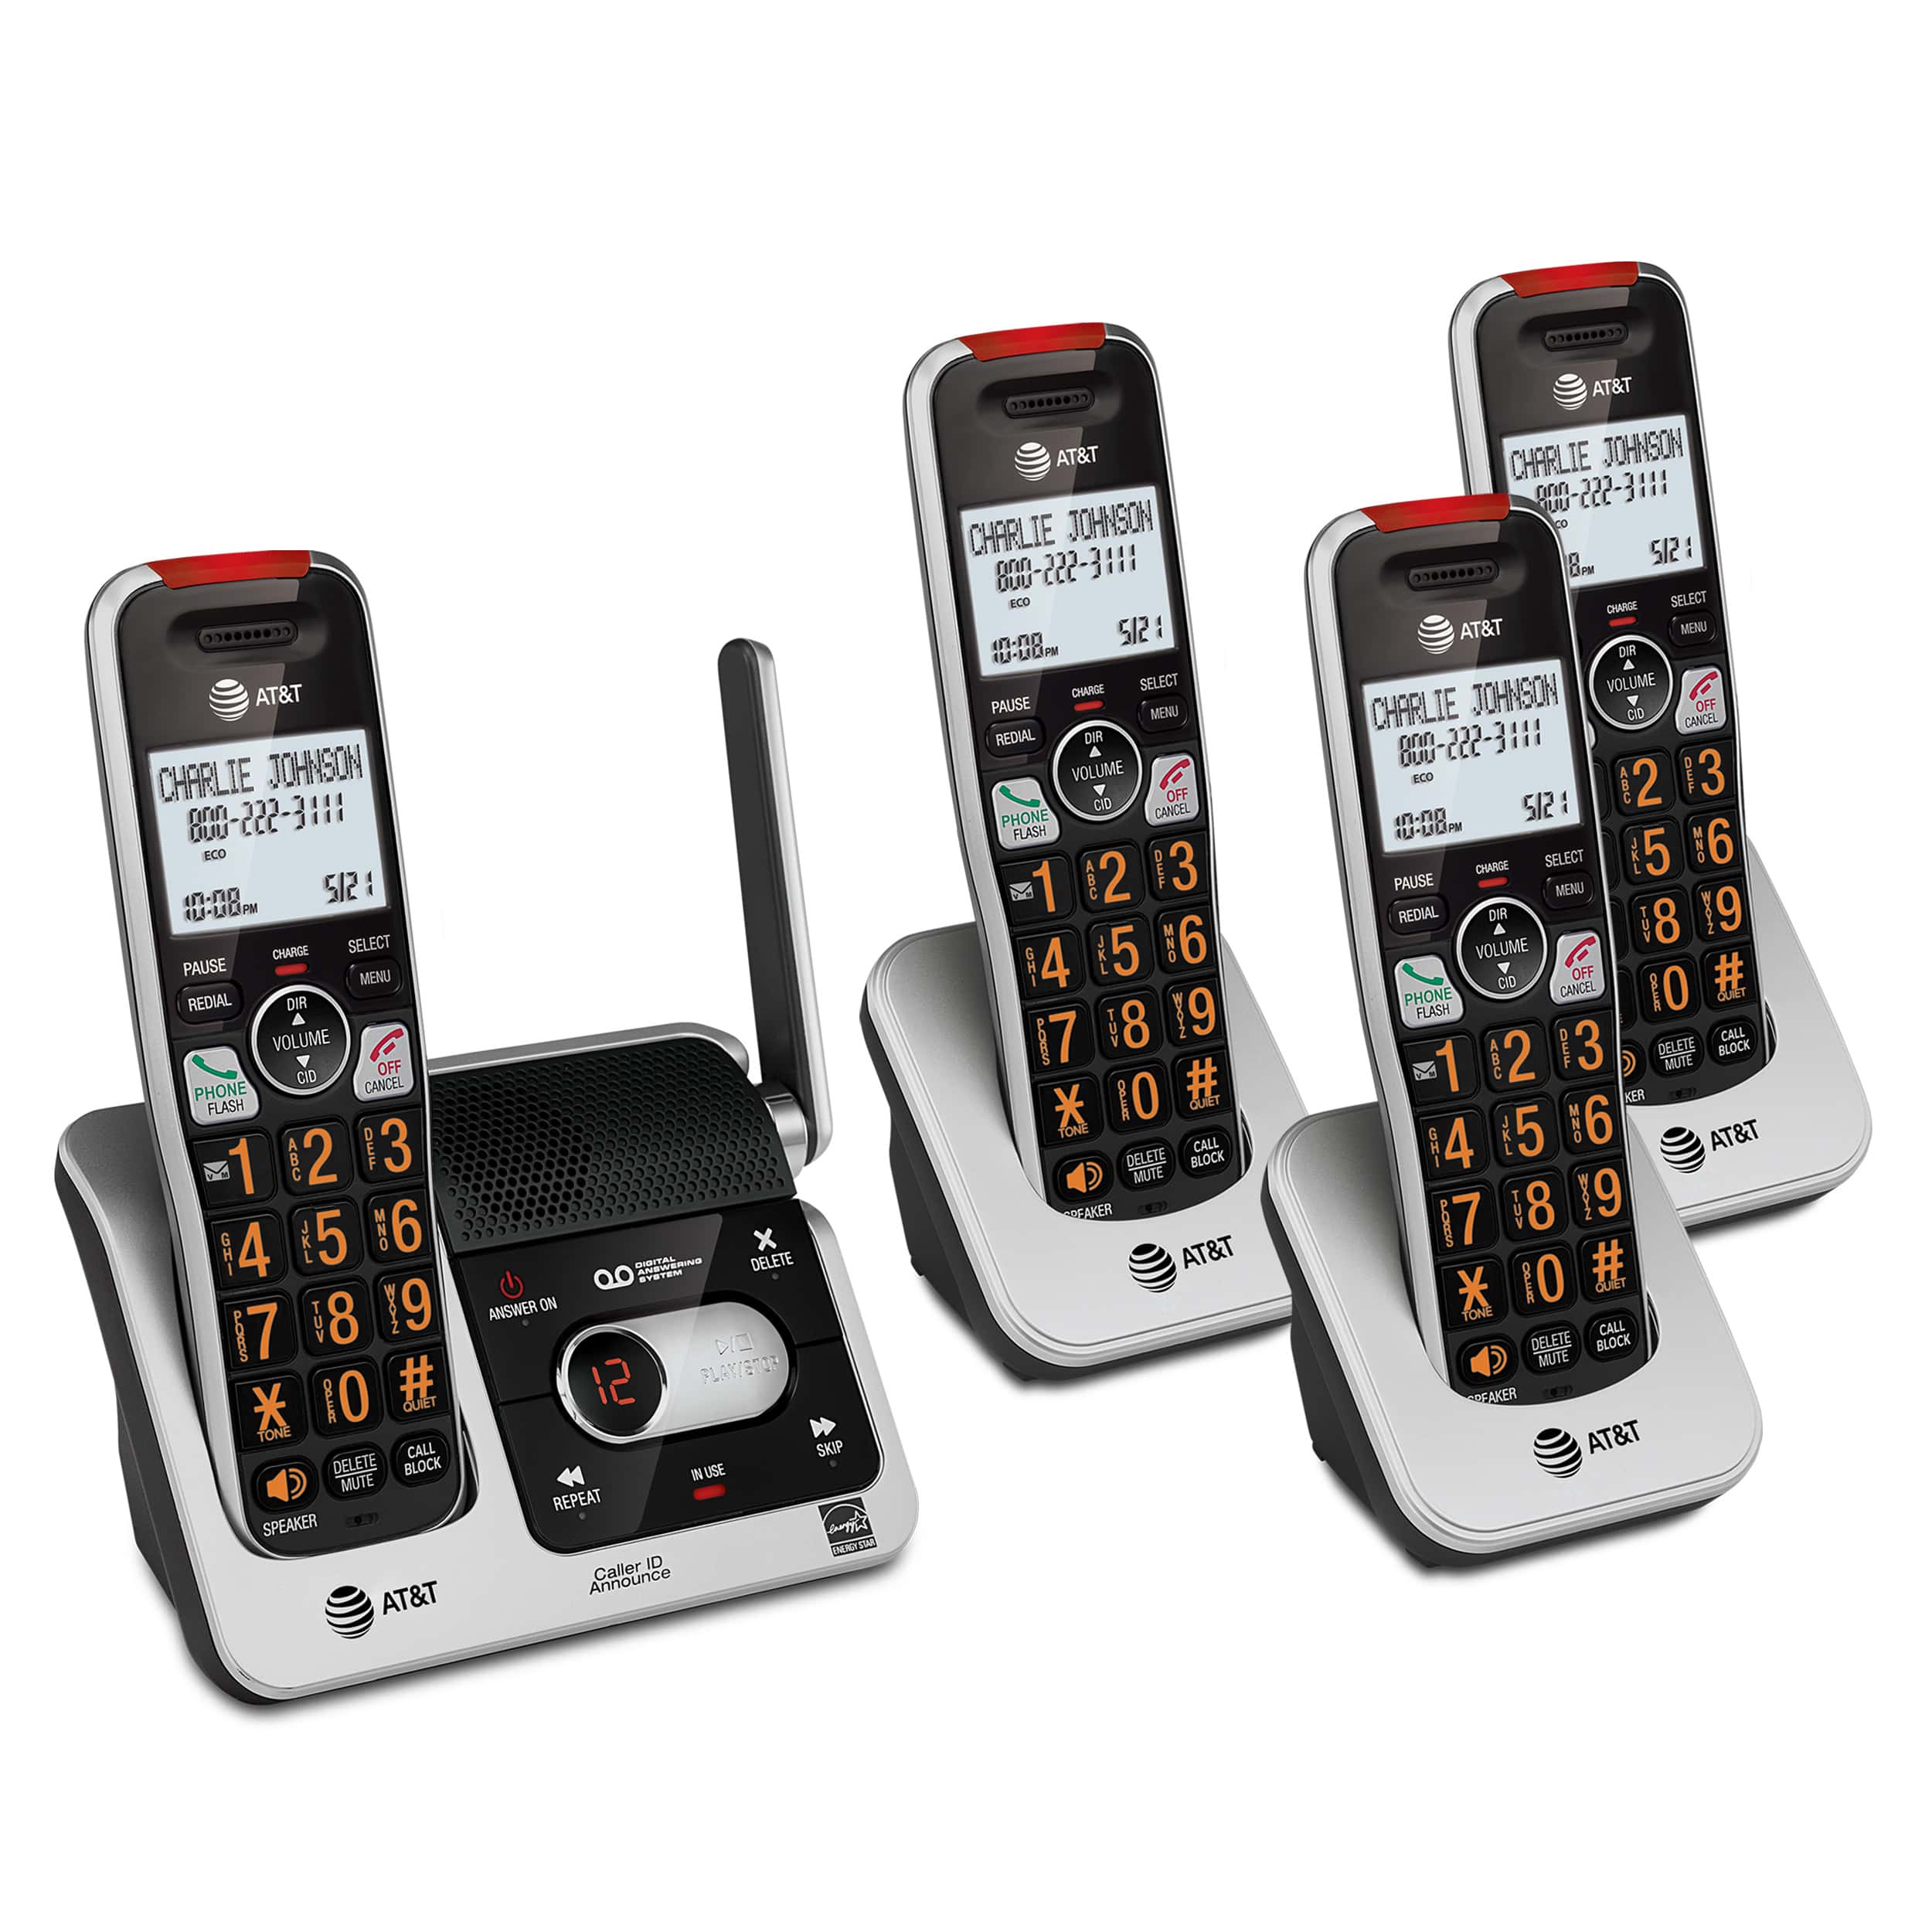 4-Handset Cordless Phone with Unsurpassed Range, Smart Call Blocker and Answering System - view 2